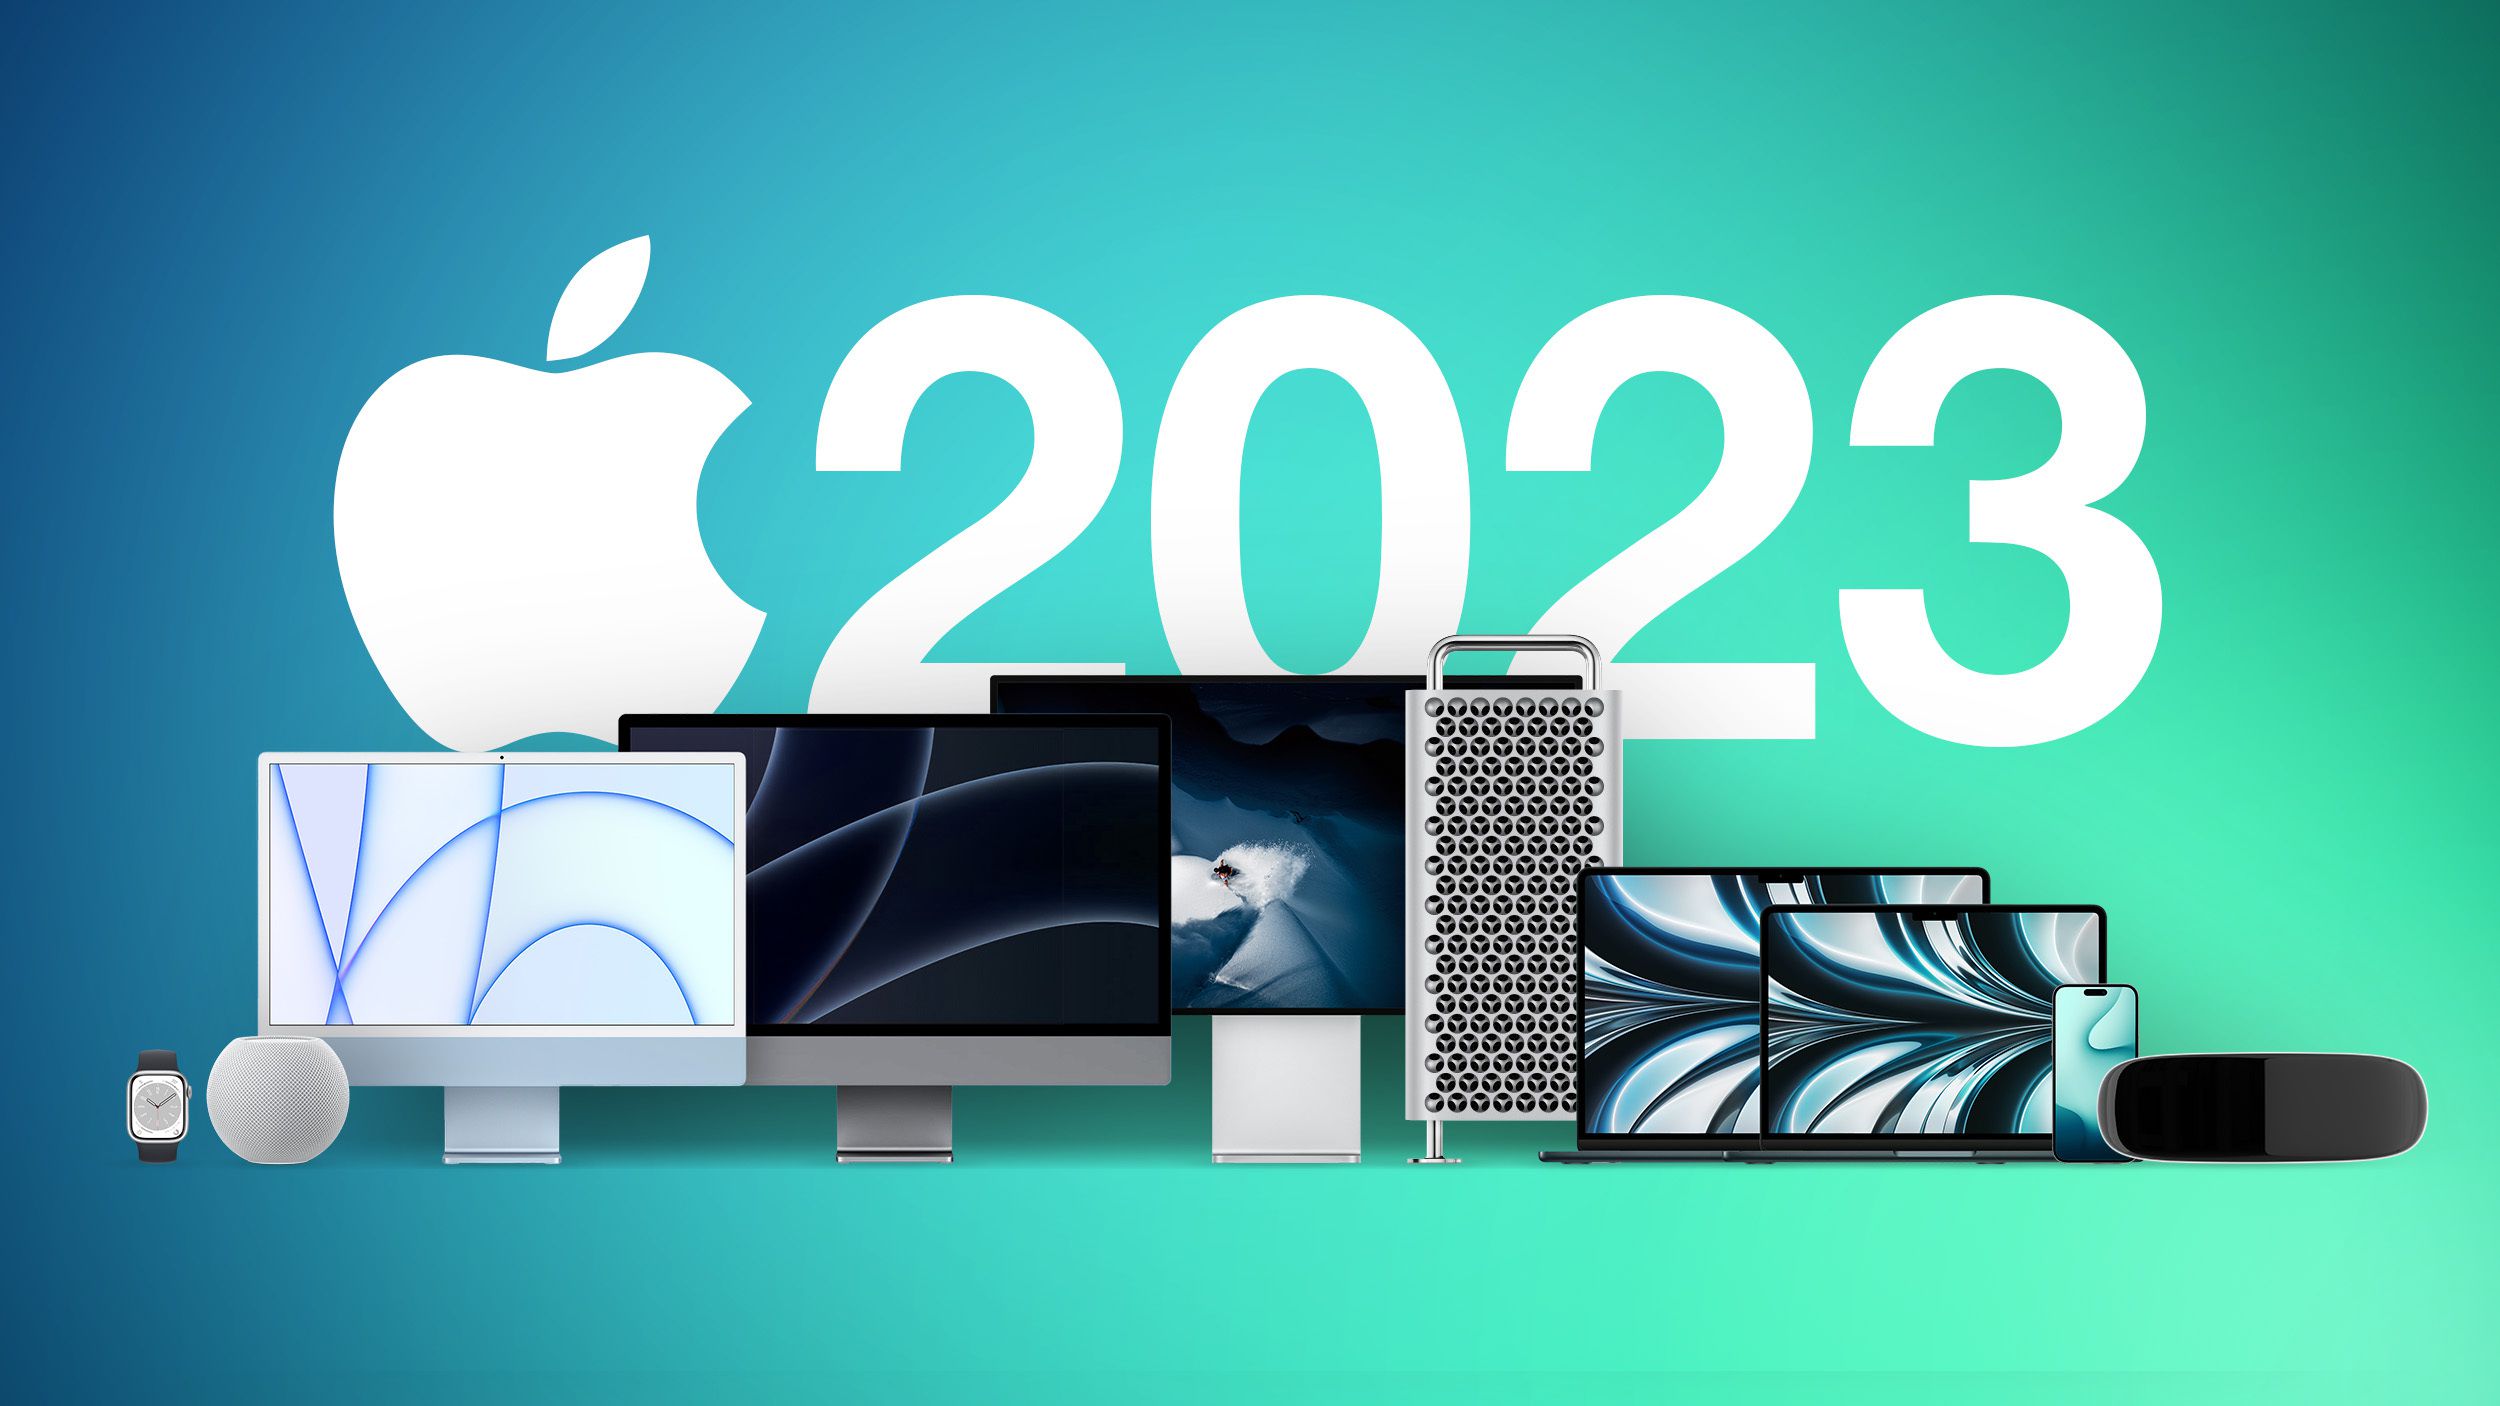 What to Expect From Apple in 2023: AR/VR Headset, iPhone 15 Pro, MacBook Pro, Ma..